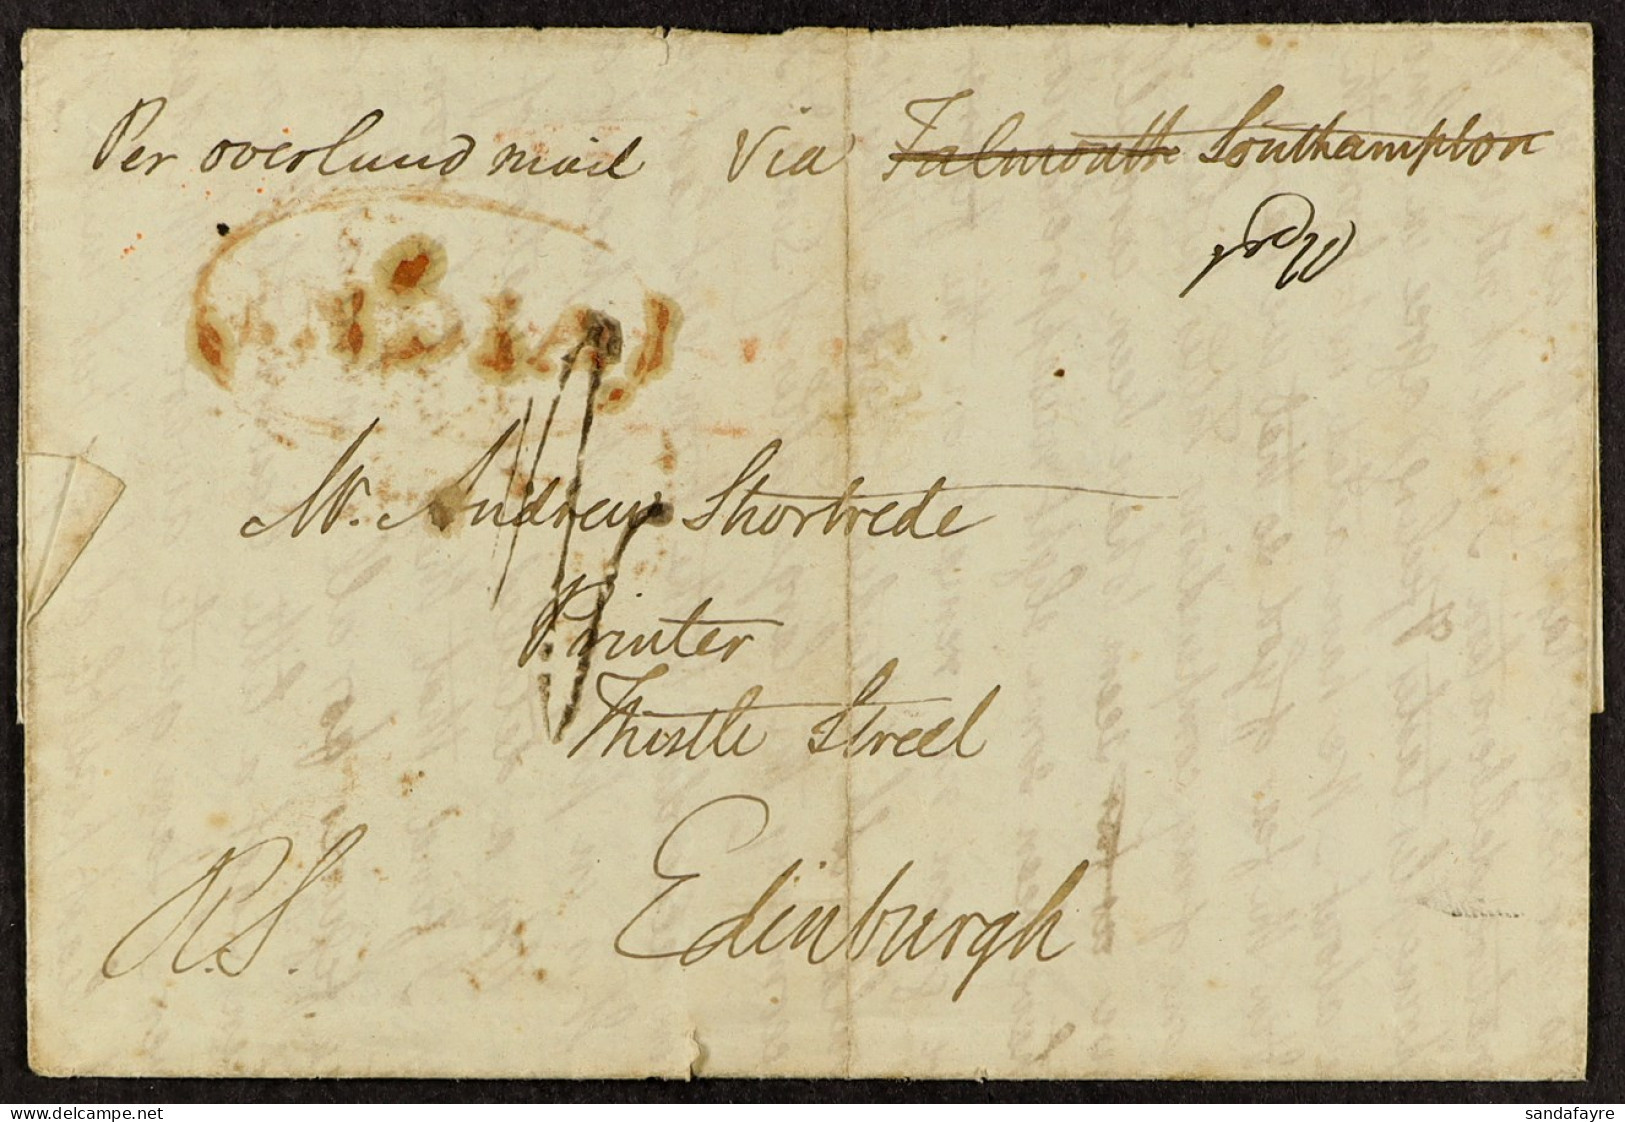 STAMP - 1843 (19th Dec) A Letter With A Number Of Postal Markings From Allahabad, INDIA, To Edinburgh, Scotland, Via Sou - ...-1840 Prephilately